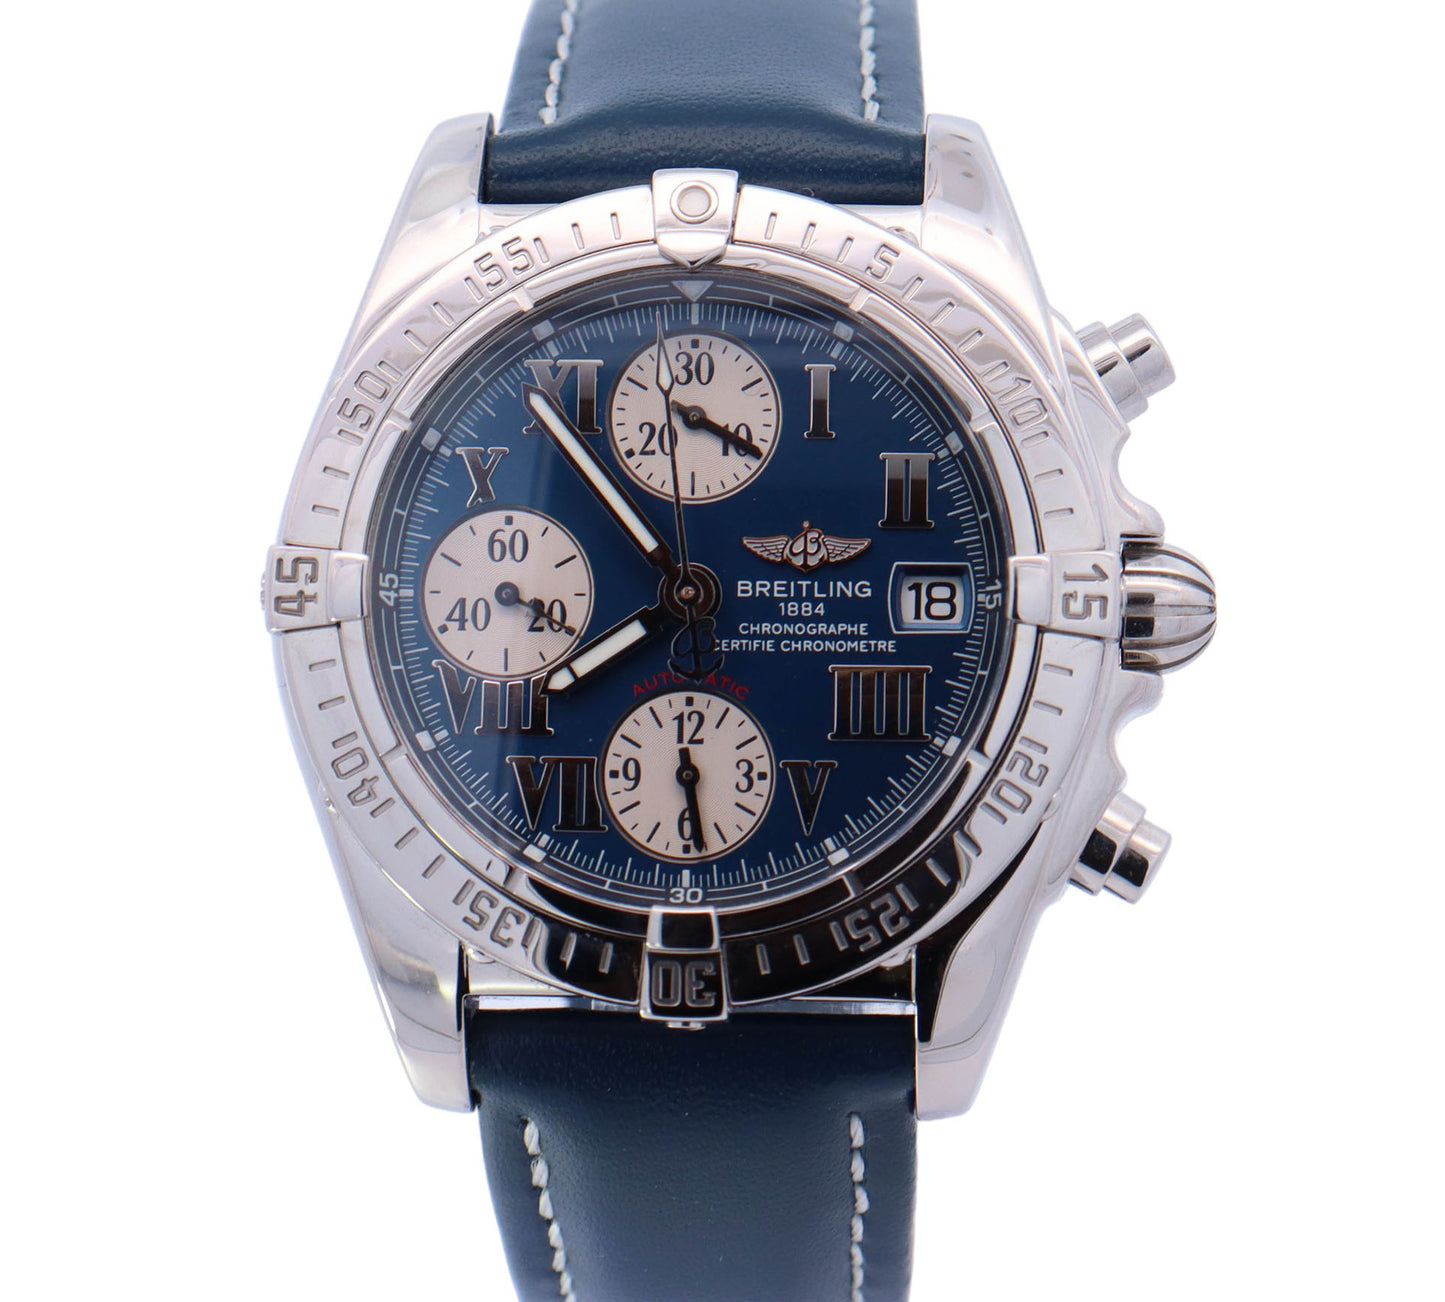 Breitling Chrono Cockpit Stainless Steel 39.5mm Blue Chronograph Dial Watch Reference# A13358 - Happy Jewelers Fine Jewelry Lifetime Warranty